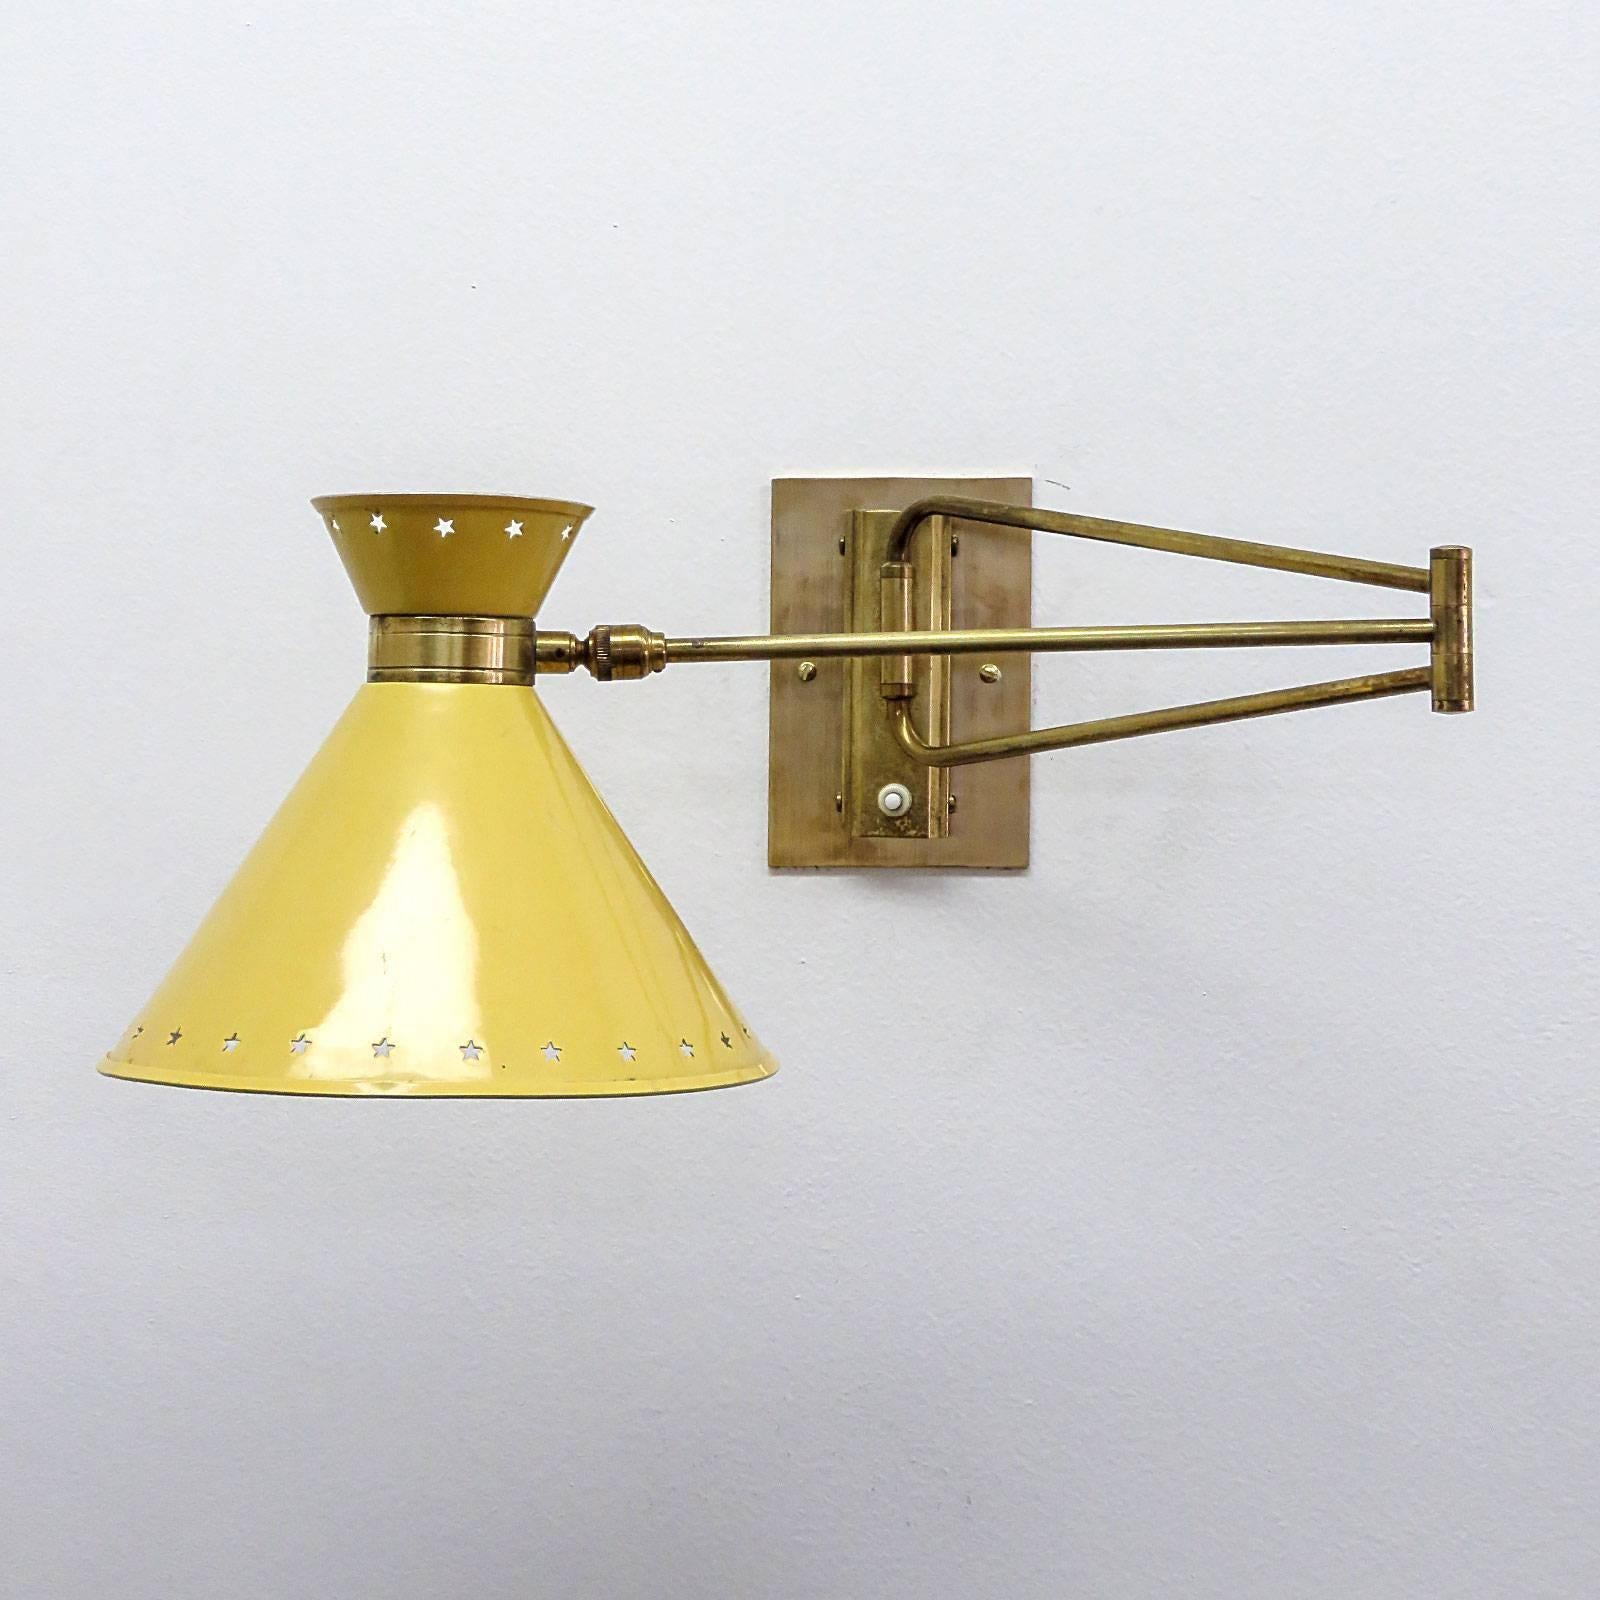 French Pair of Swing Arm Sconces by Rene Mathieu for Lunel